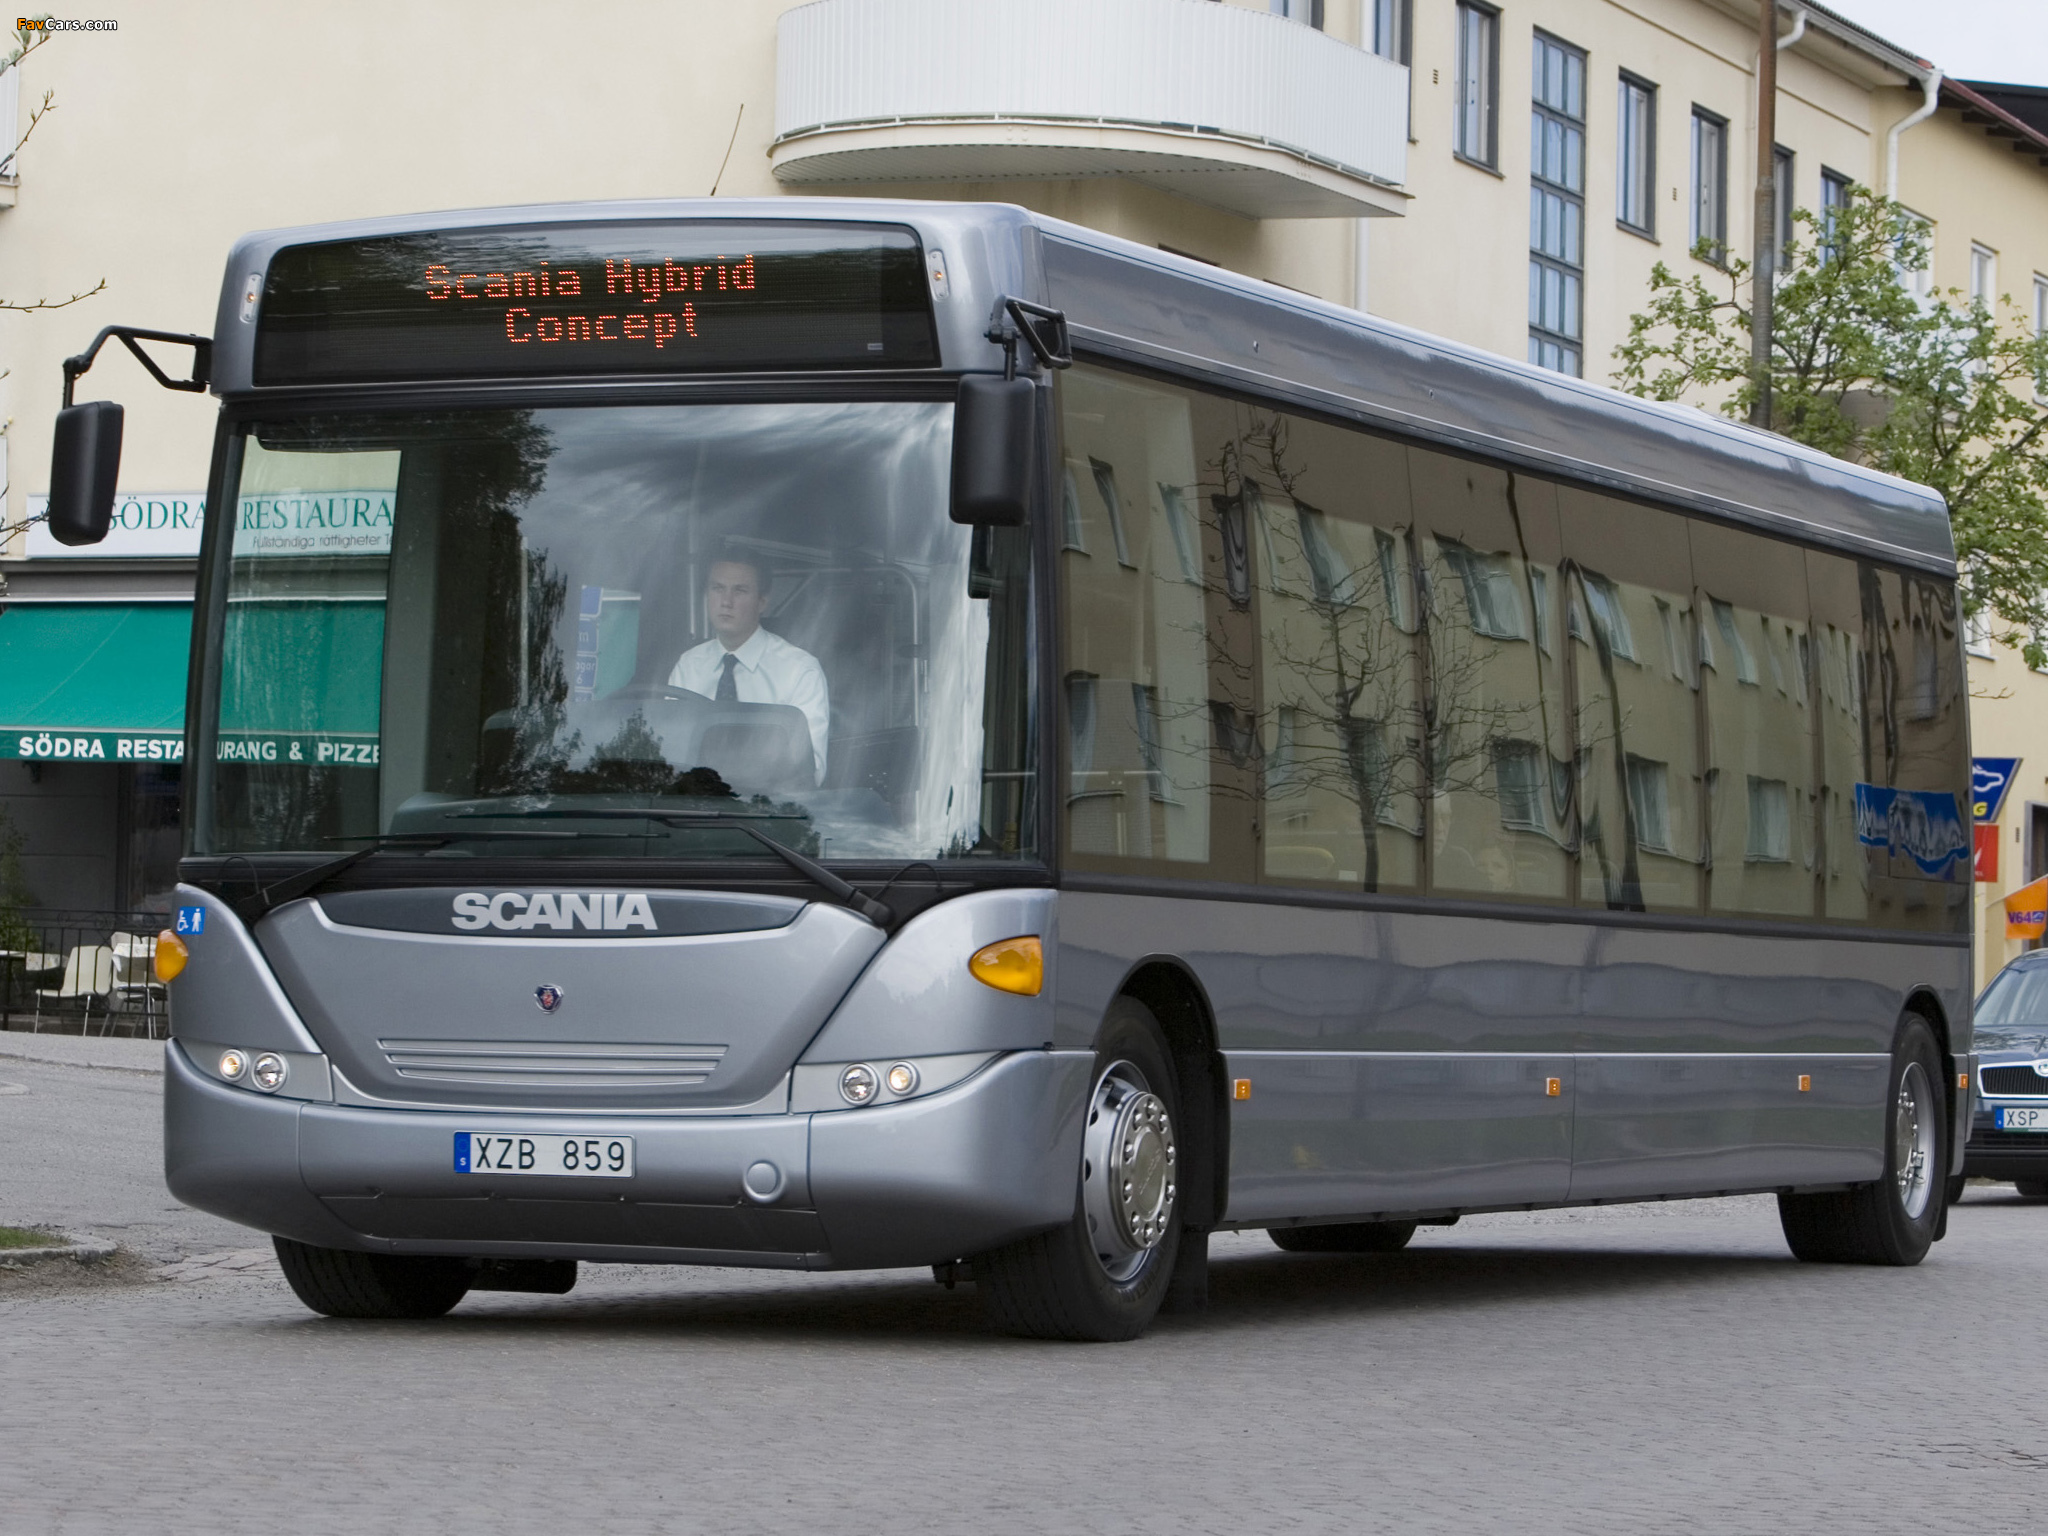 Scania Hybrid Concept Bus 2007 pictures (2048 x 1536)